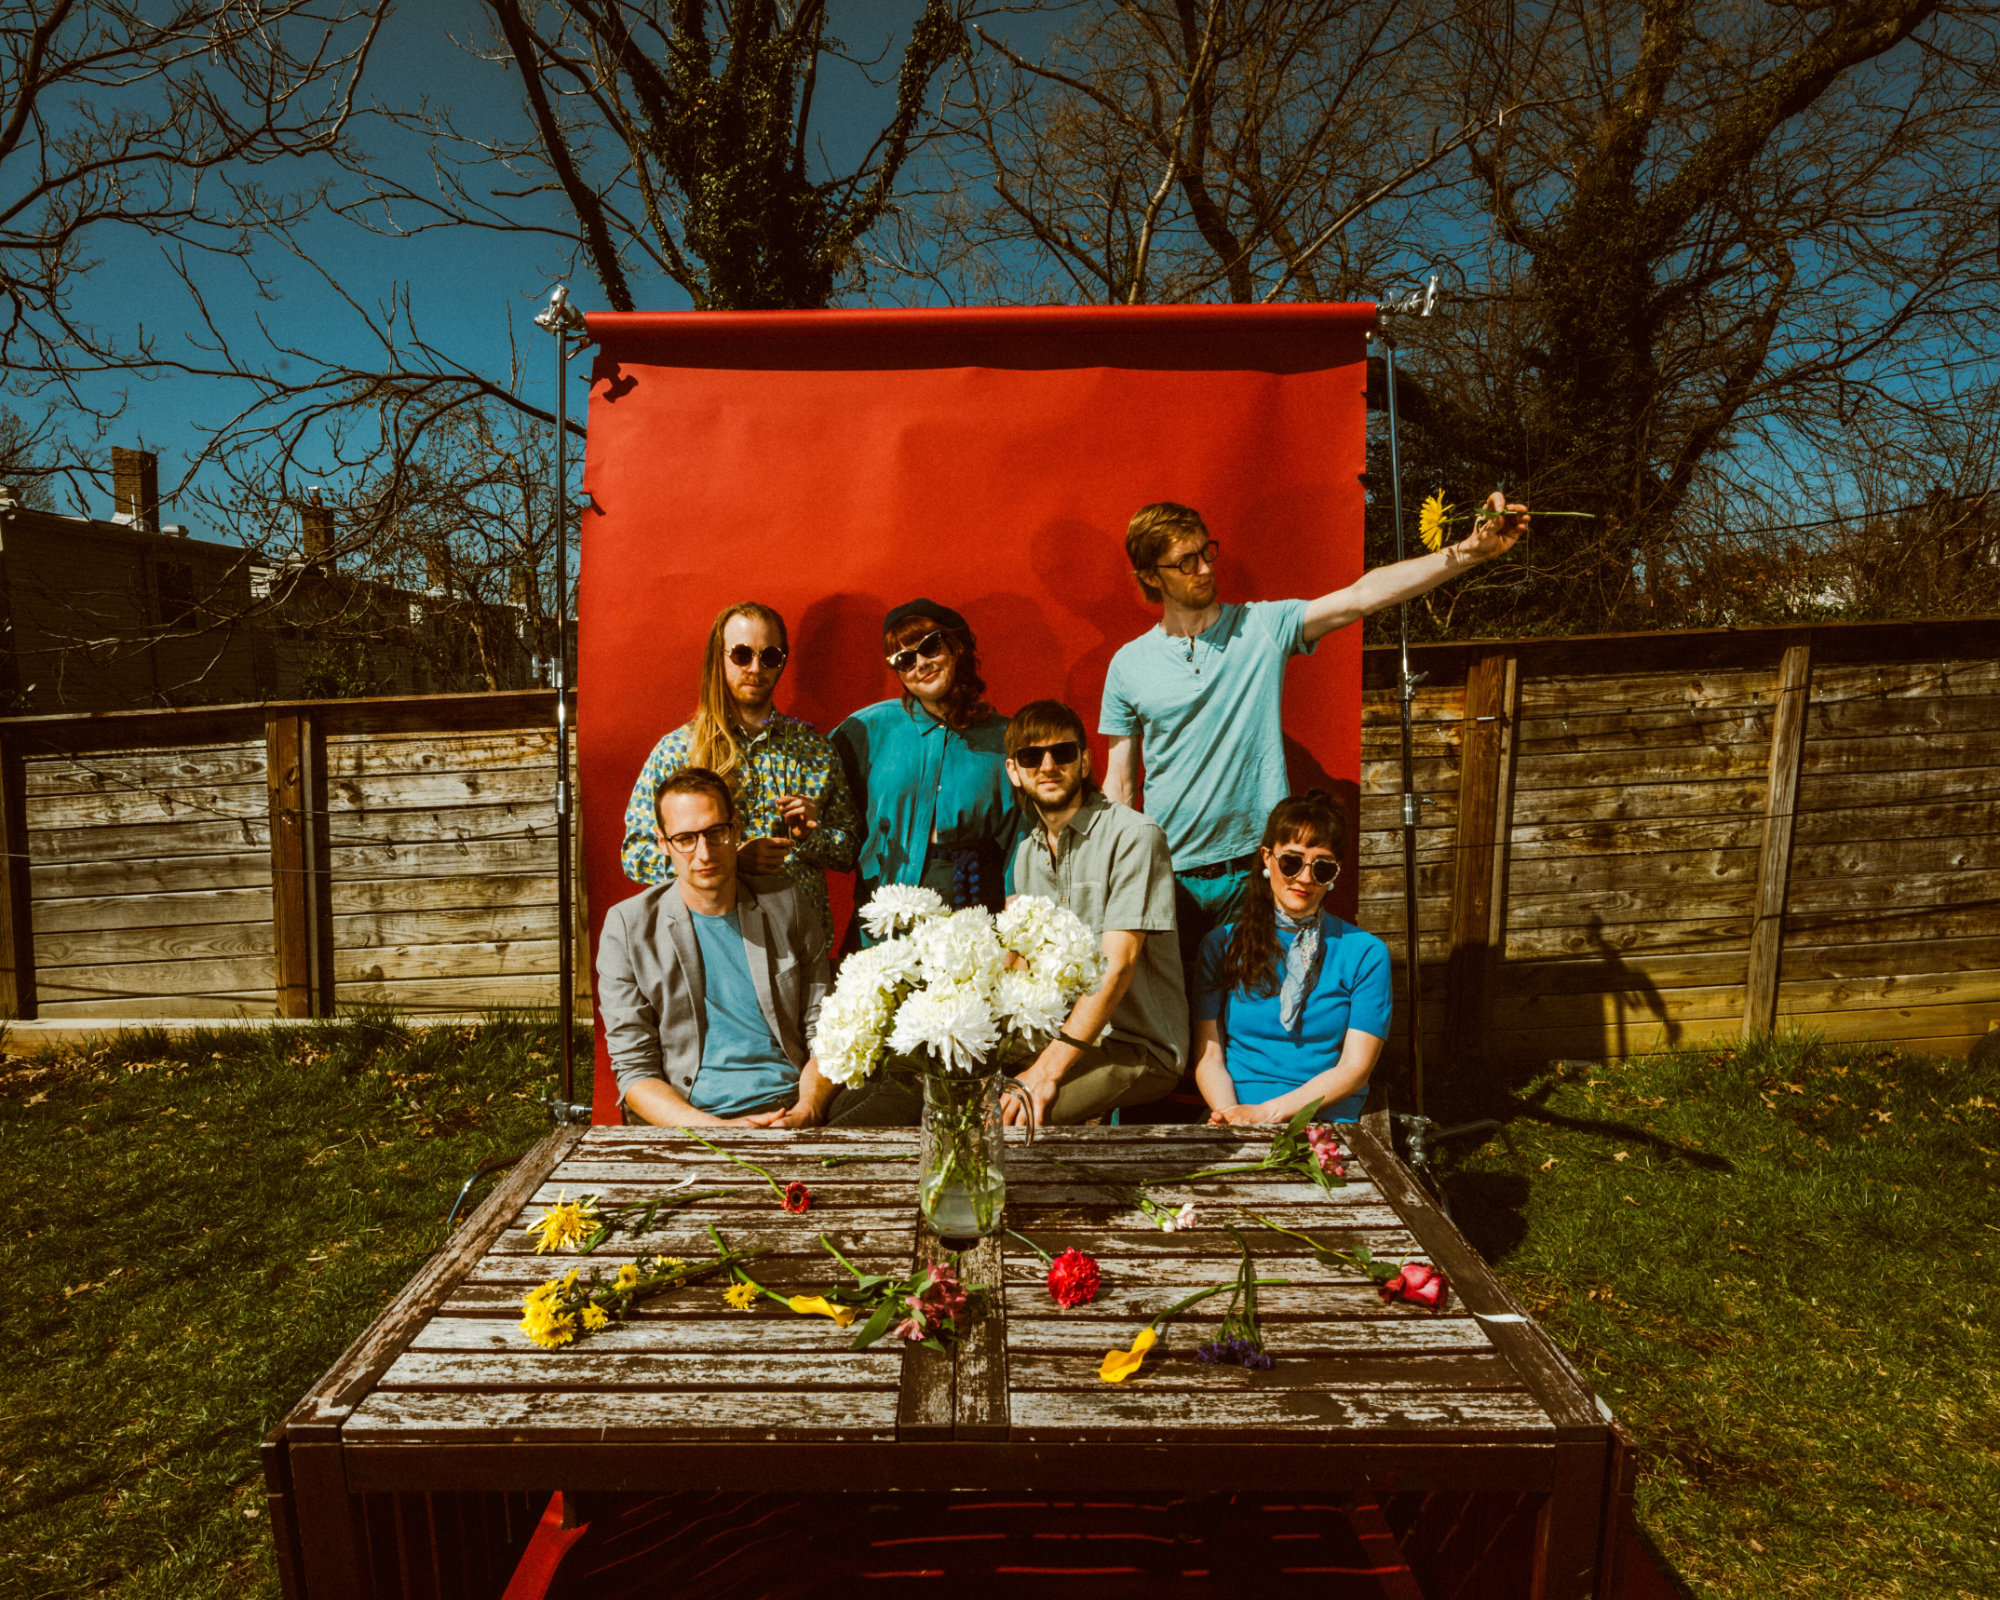 The North Country band sits together outside in front of a red photo backdrop. A wooden table in front of the band displays yellow and white flowers.